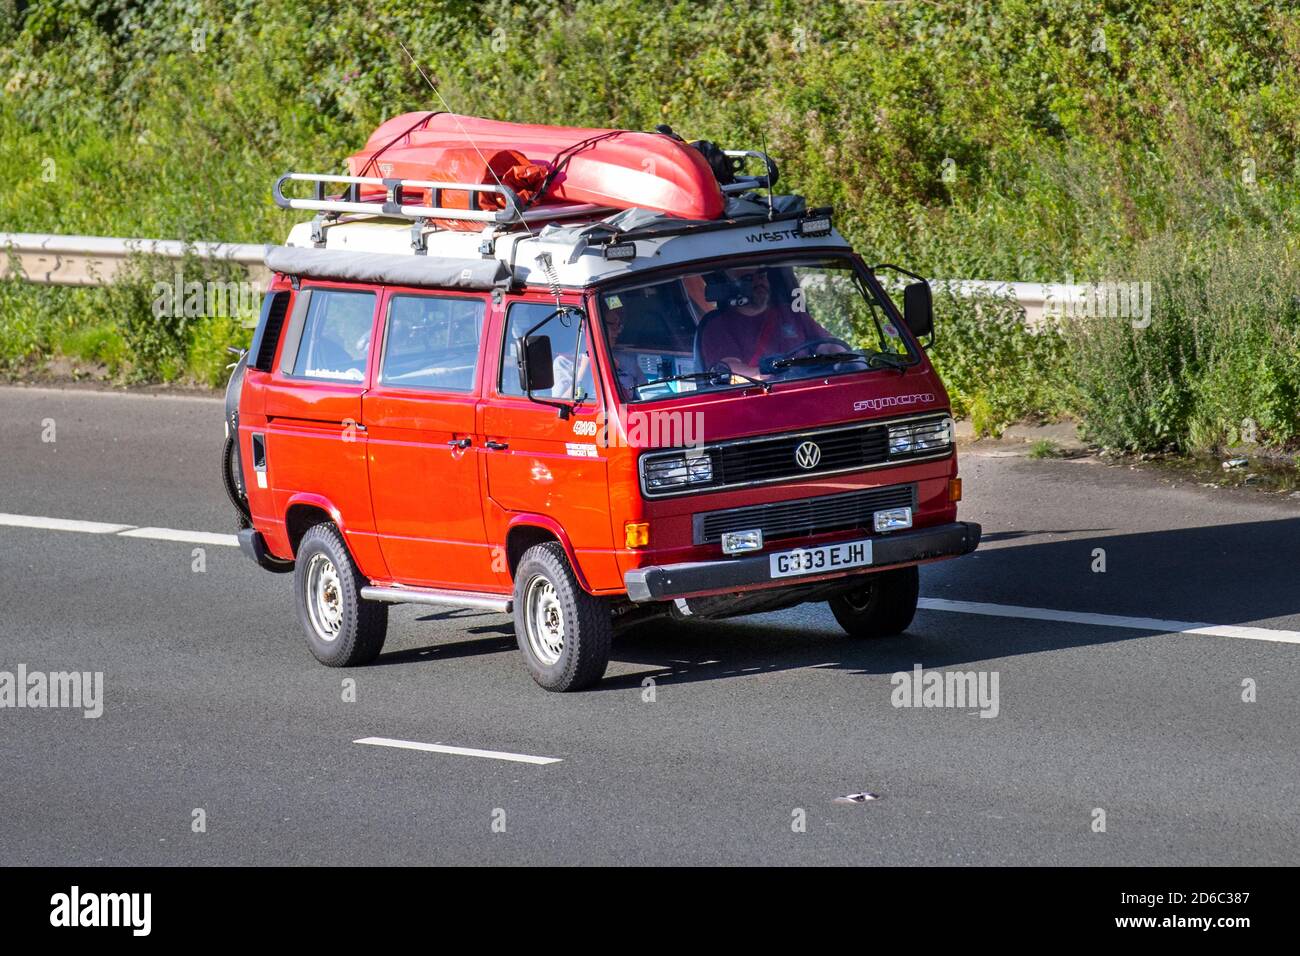 1989 80s Red VW volkswagen Vanagon Westfalia Syncro Caravans and Motorhomes, campervans on Britain's roads, RV leisure vehicle, family holidays, caravanette vacations, Touring caravan holiday, van conversions, Vanagon autohome, life on the road, Stock Photo